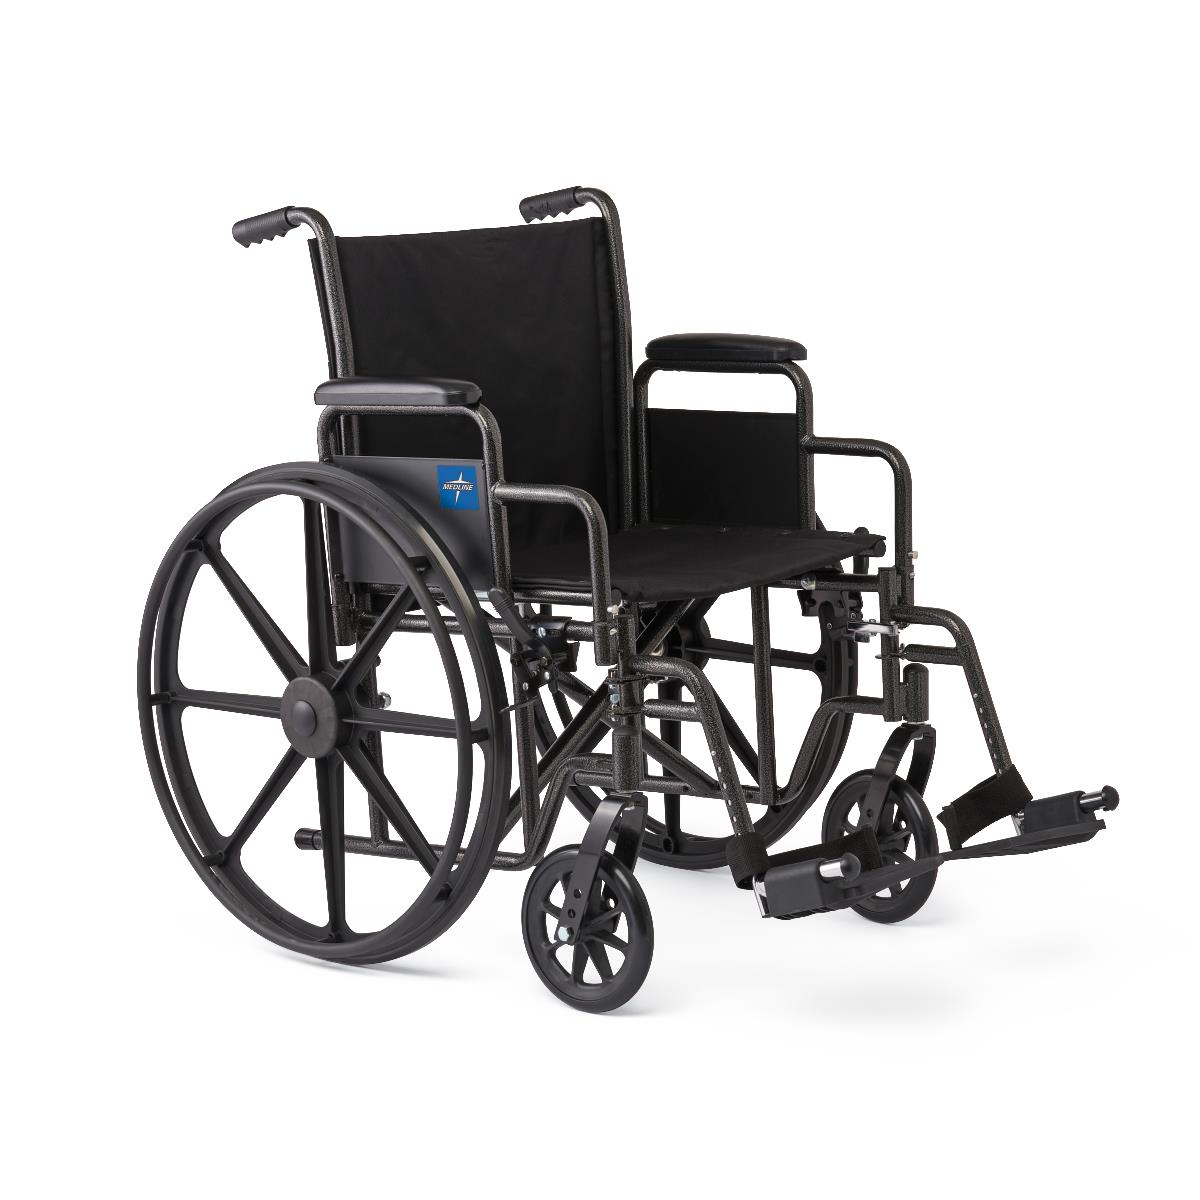 16&quot; Wide K1 Basic Nylon Wheelchair with Swing-Back Desk-Length Arms and Swing-Away Leg Rest